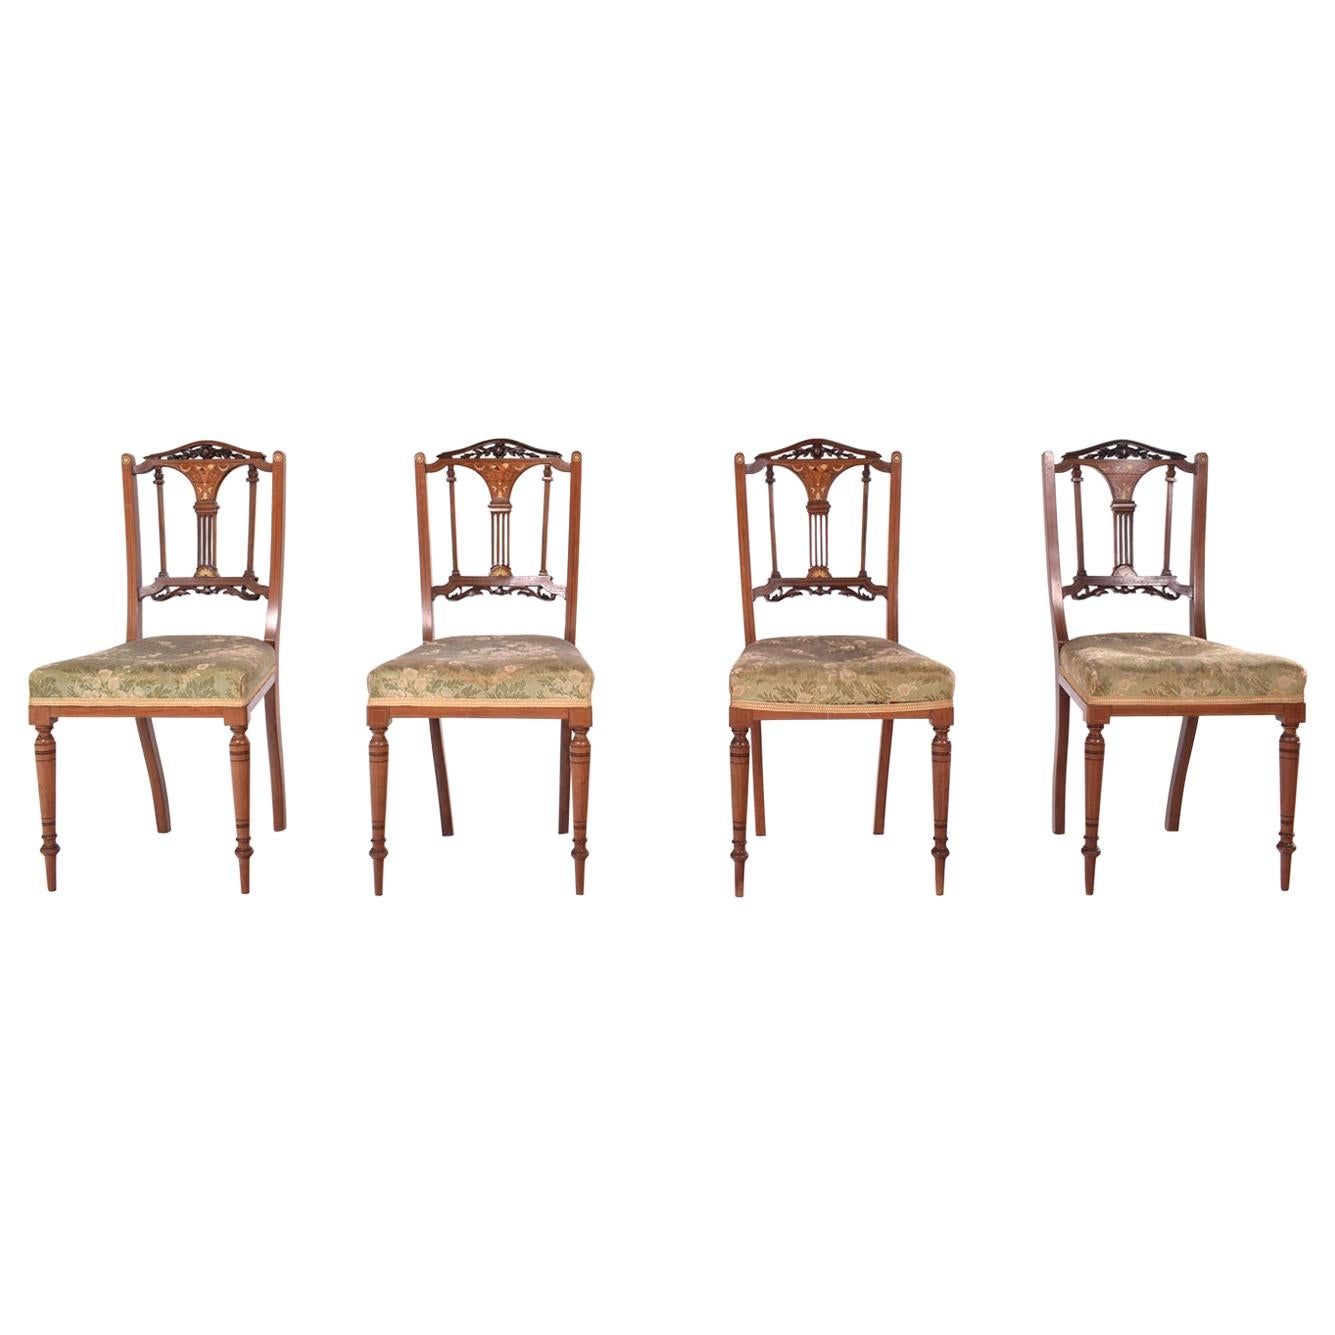 4 Edwardian Rosewood Inlaid Dining Chairs